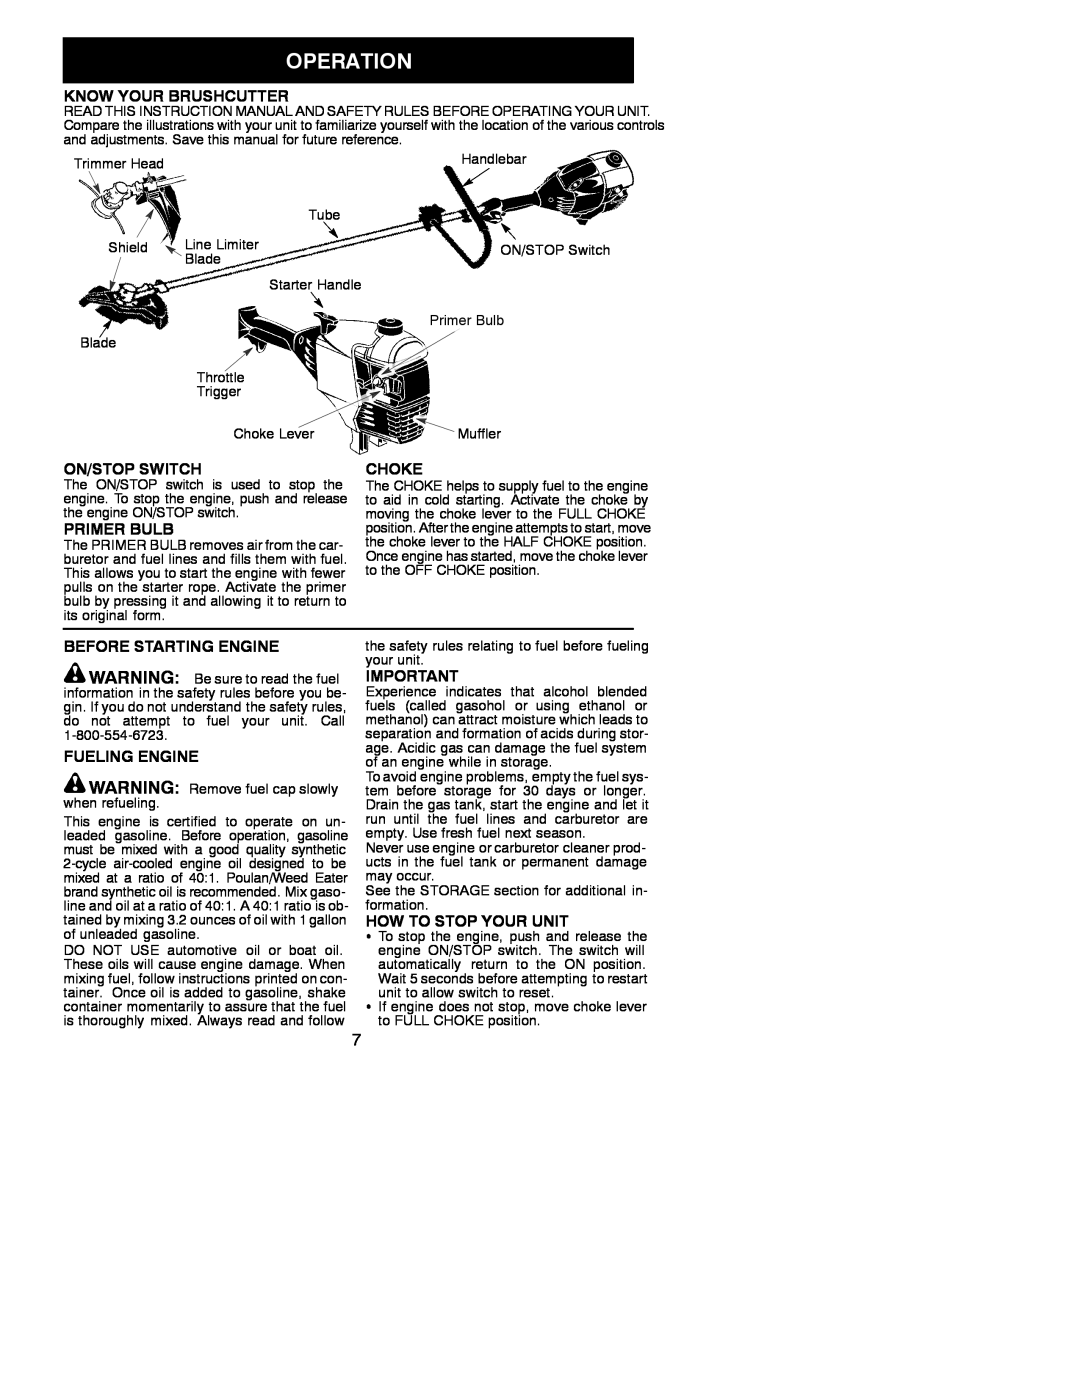 Poulan 530088129 Know Your Brushcutter, On/Stop Switch, Primer Bulb, Choke, Before Starting Engine, Fueling Engine 